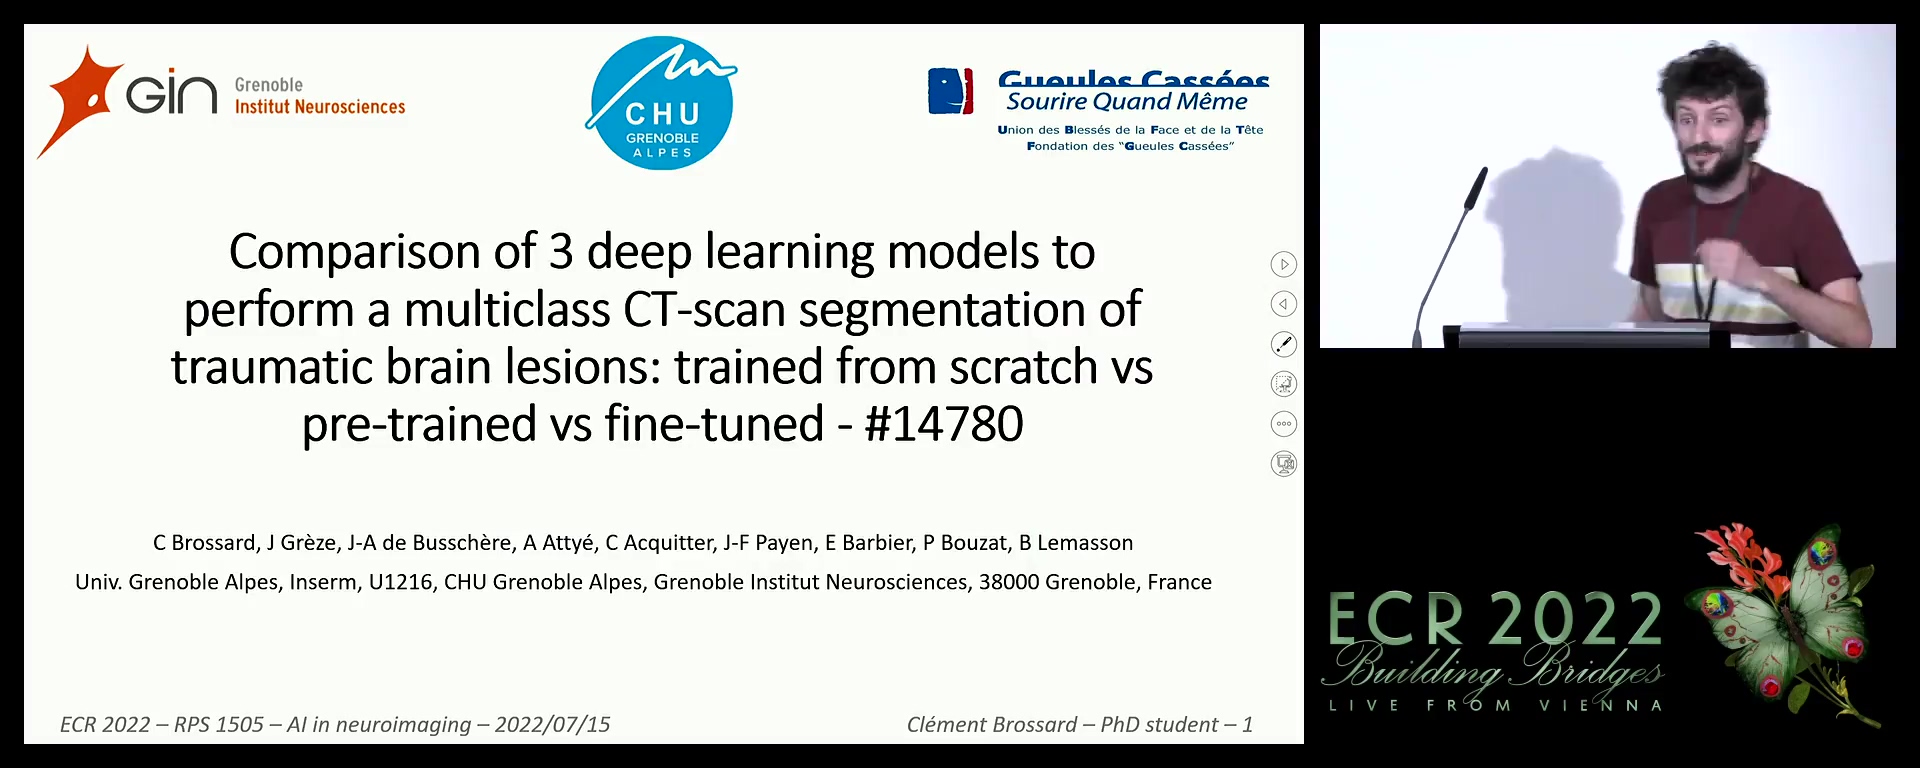 Comparison of 3 deep learning models to perform a multiclass CT-scan segmentation of traumatic brain lesions: trained from scratch vs pre-trained vs fine-tuned - Clément Brossard, Villeurbanne / FR